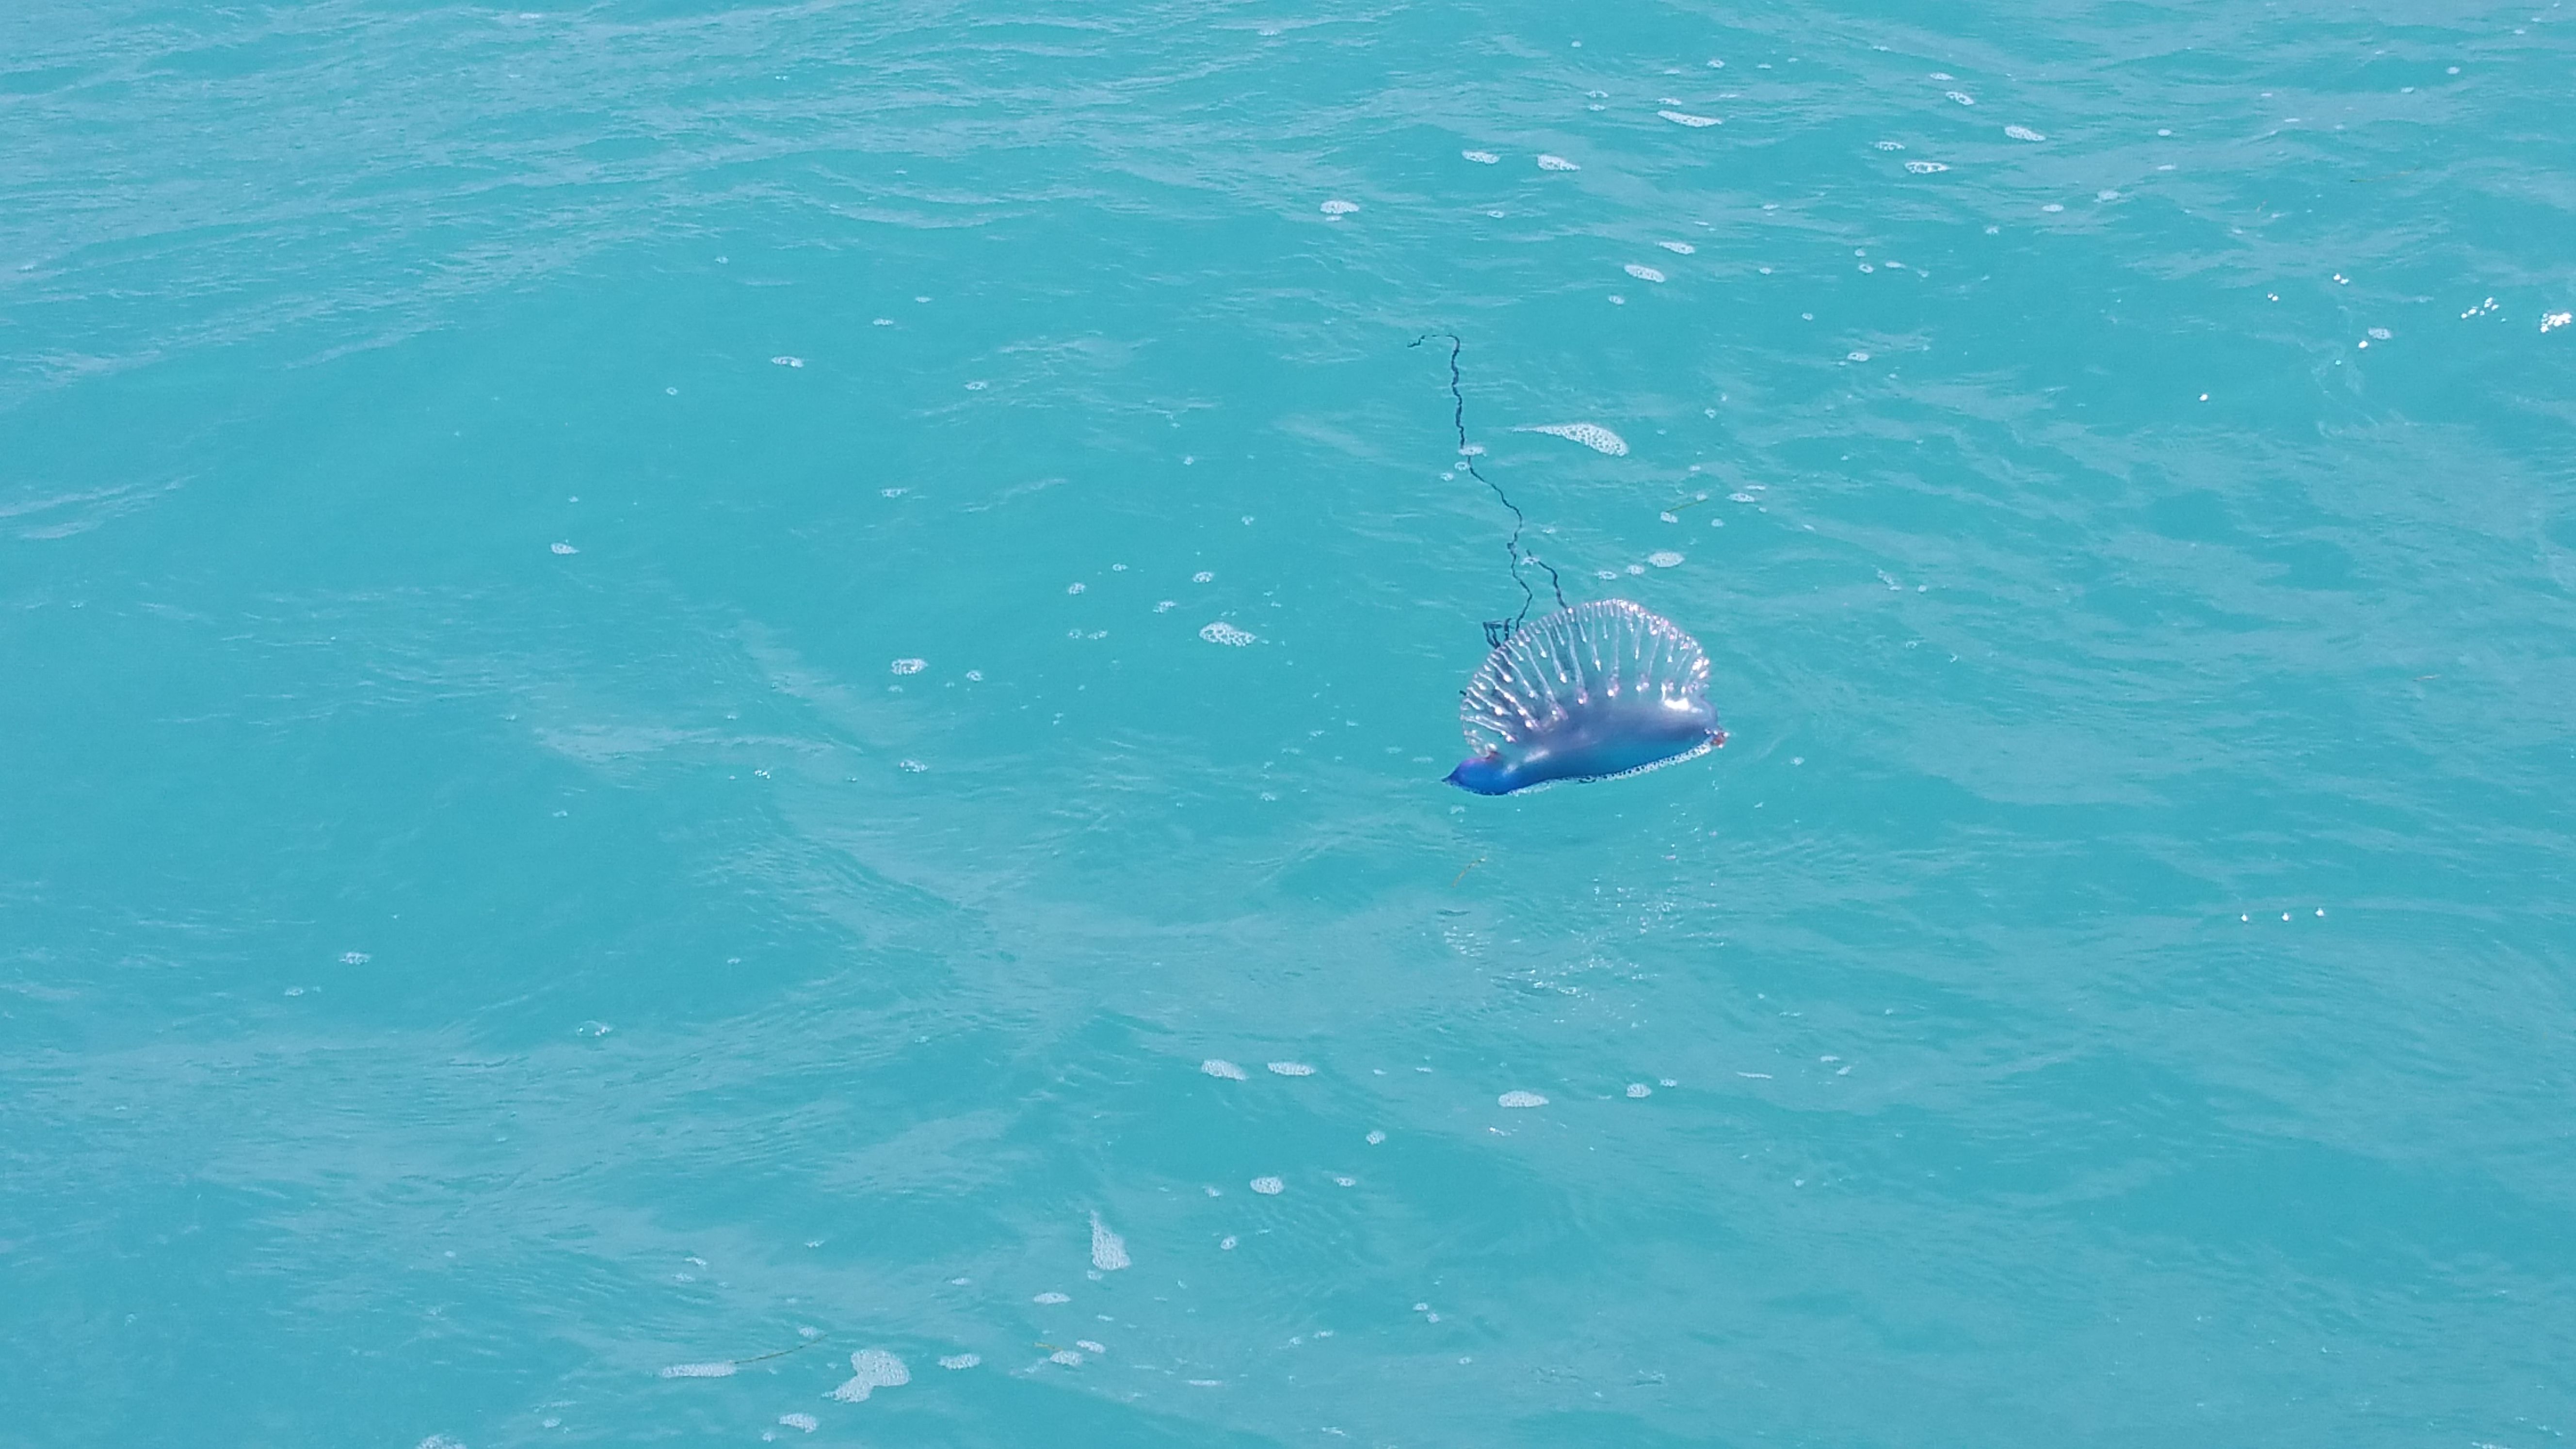 A Portuguese man-of-war floating in the water off the coast of the Florida Keys.